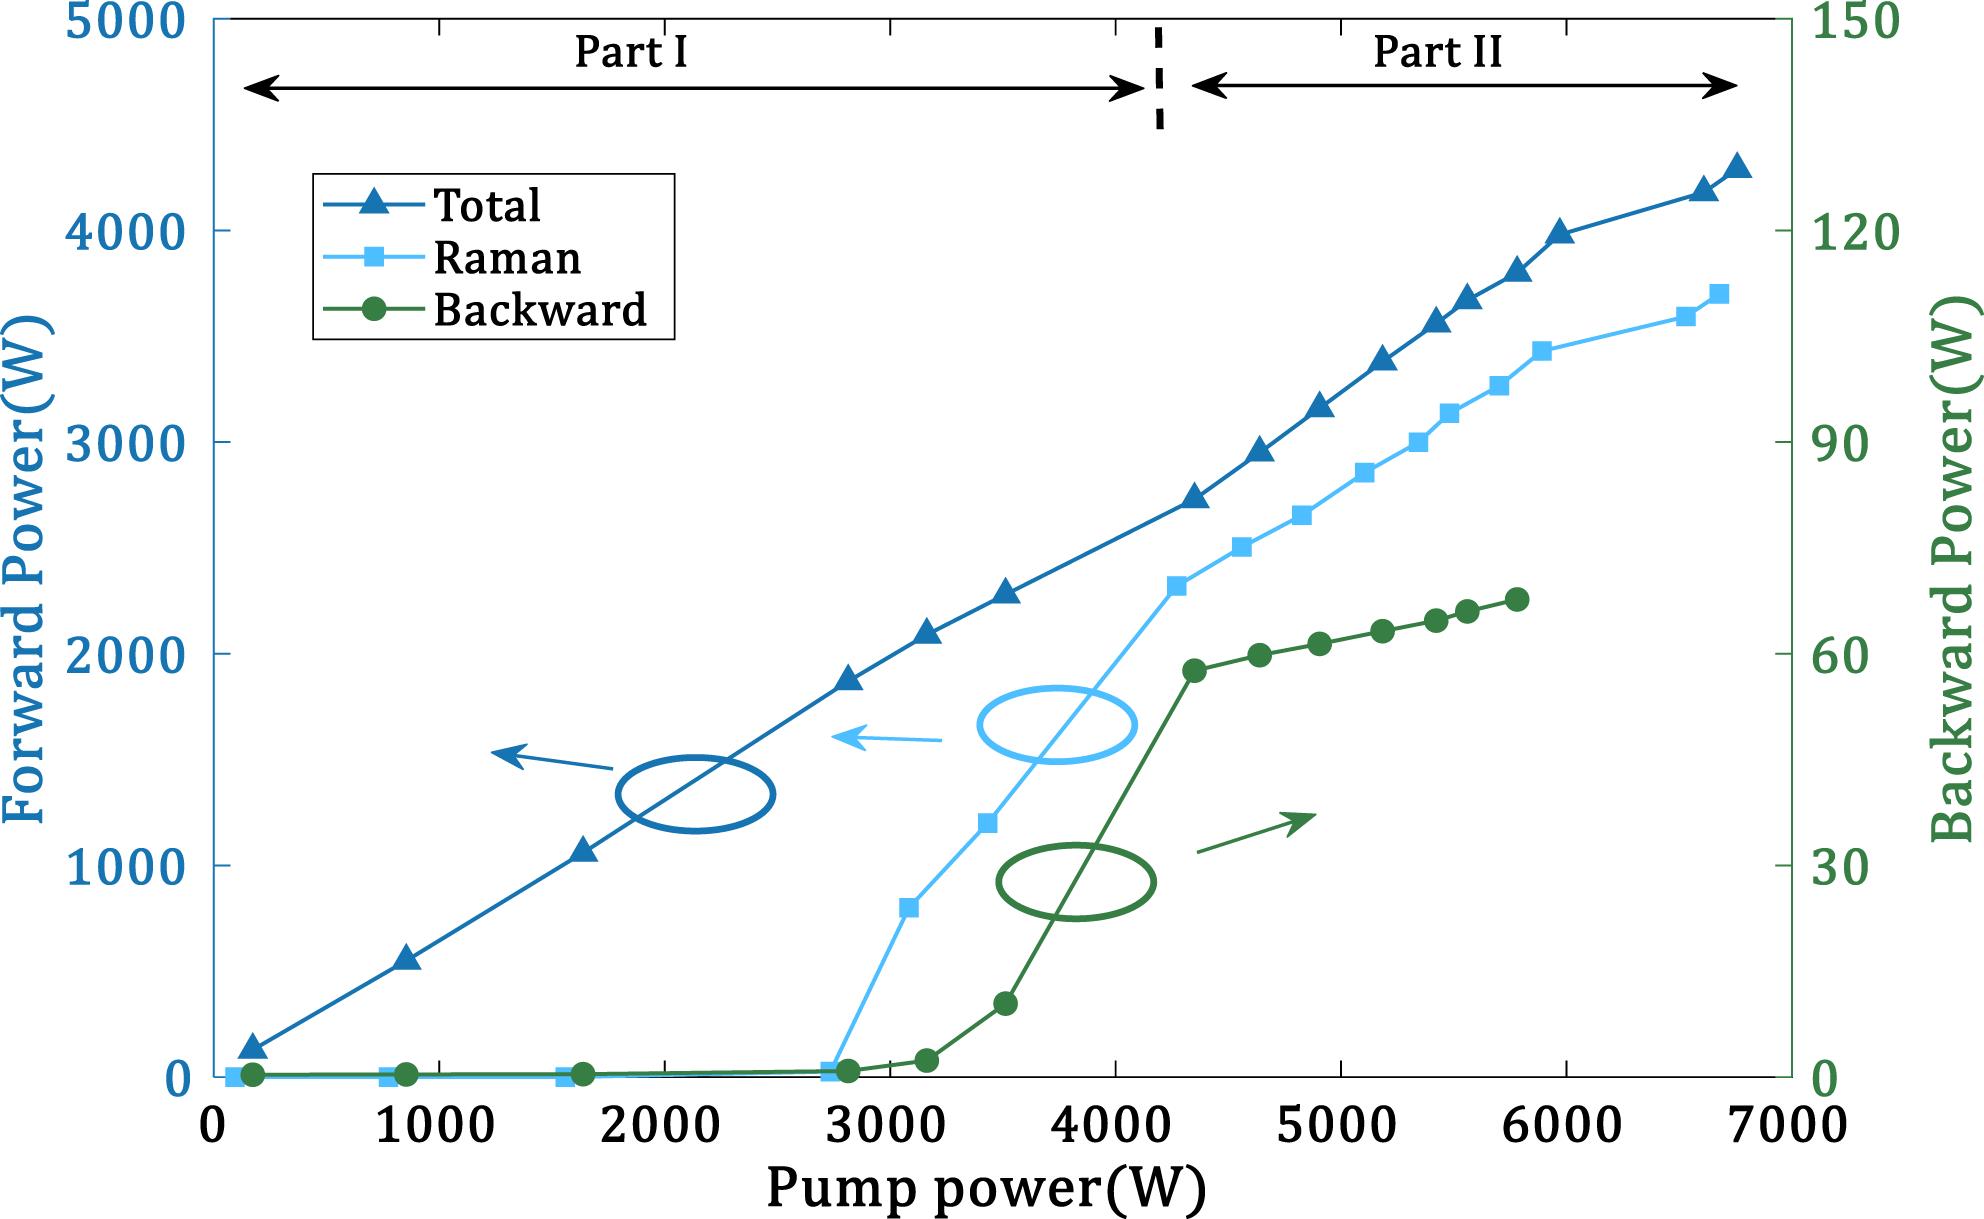 Forward and backward output power as a function of pump power (only forward pumping in part I and both forward and backward pumping in part II).